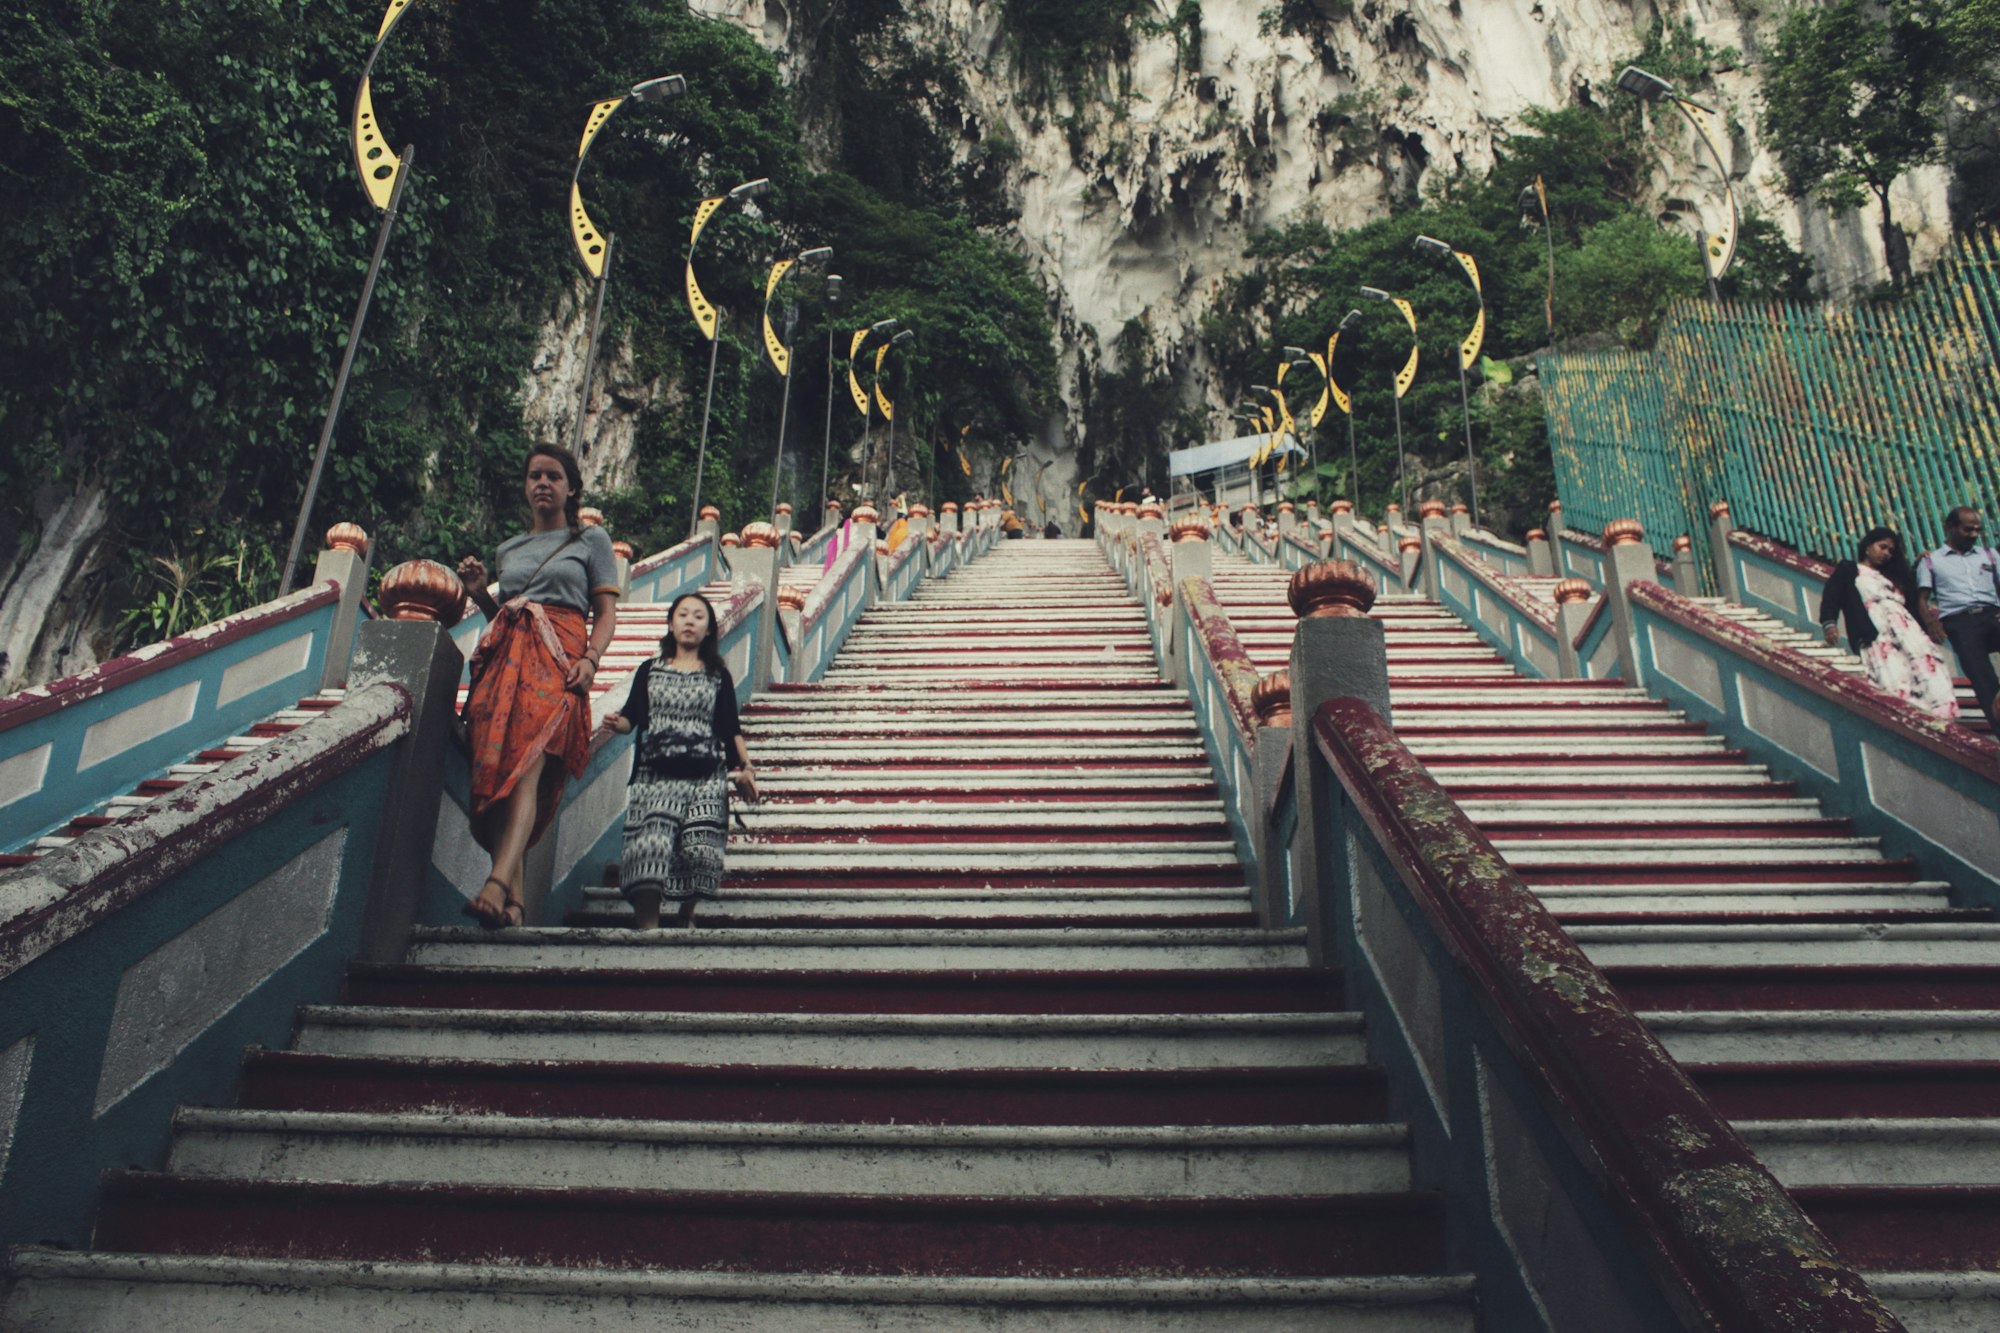 One of the many tourist attractions that you simply cannot miss when visiting Kuala Lumpur is the Batu Caves. It’s a hidden temple inside a–you guessed it–cave.